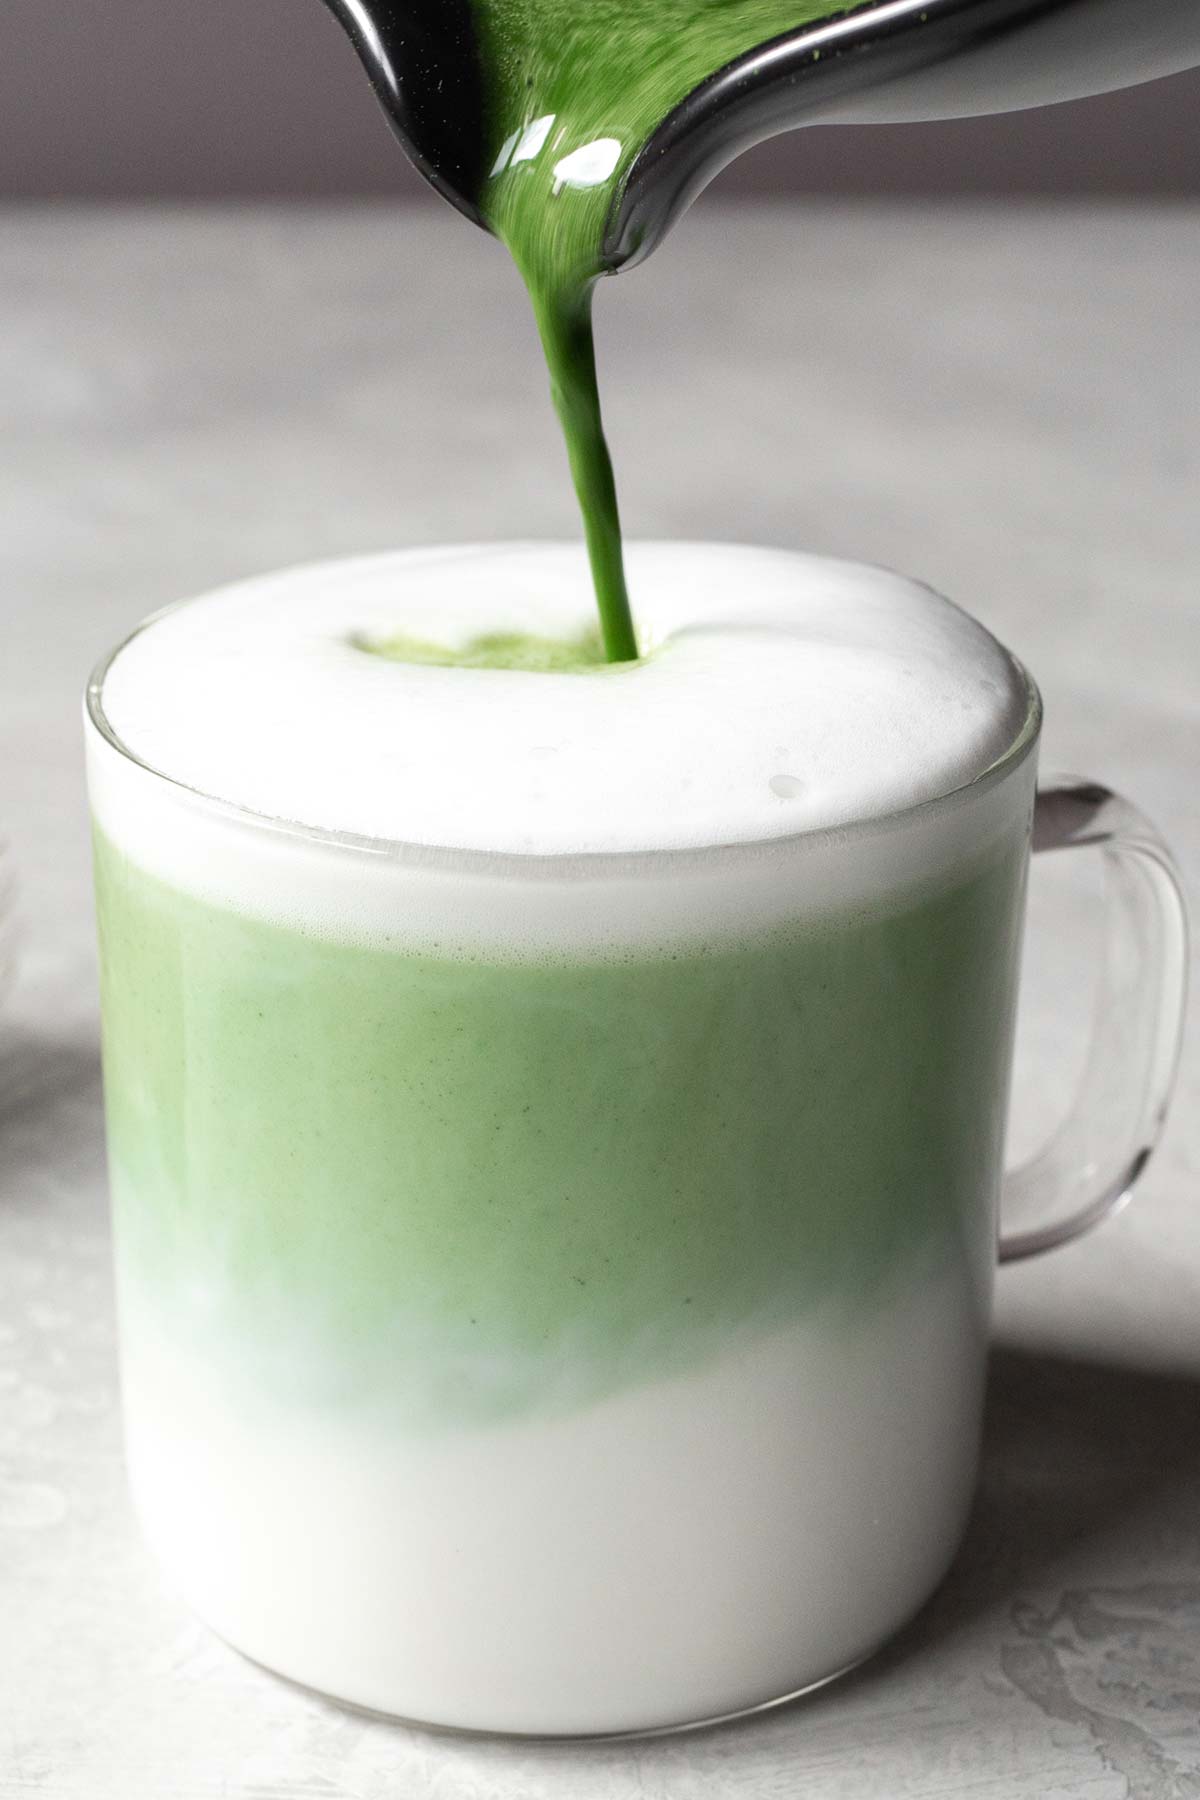 Matcha Latte being poured into clear mug.